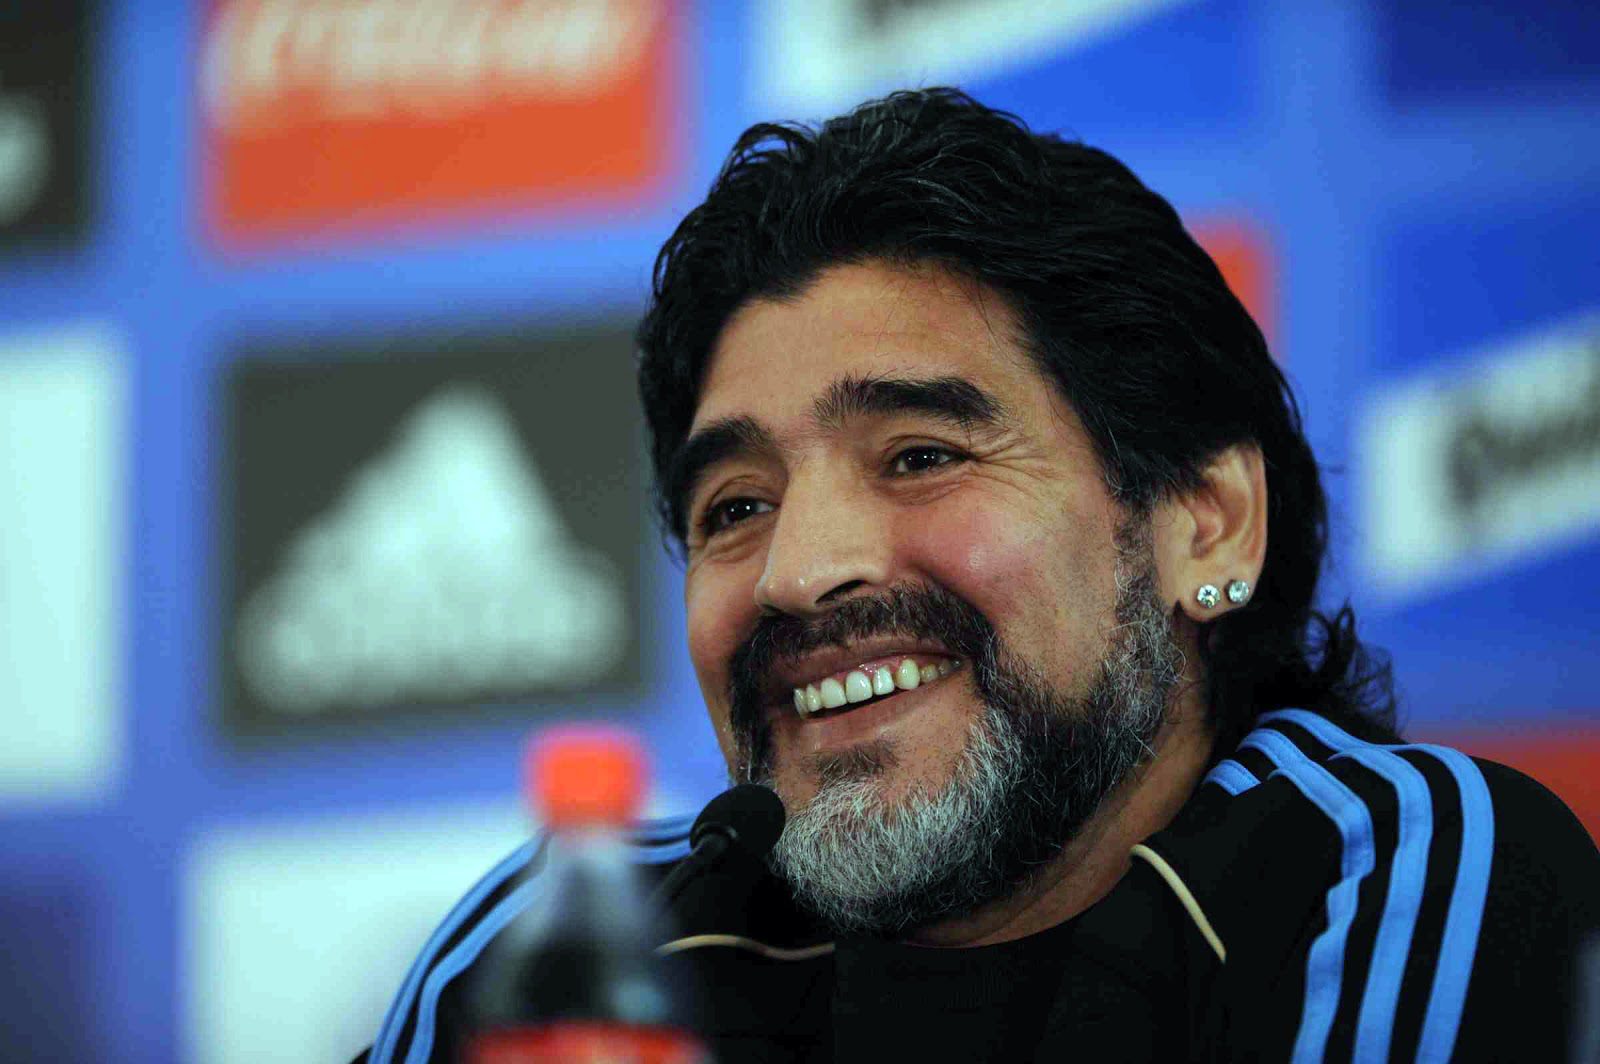 Diego Maradona’s death, 8 medical practitioners to Face trial-Argentine Court reveals